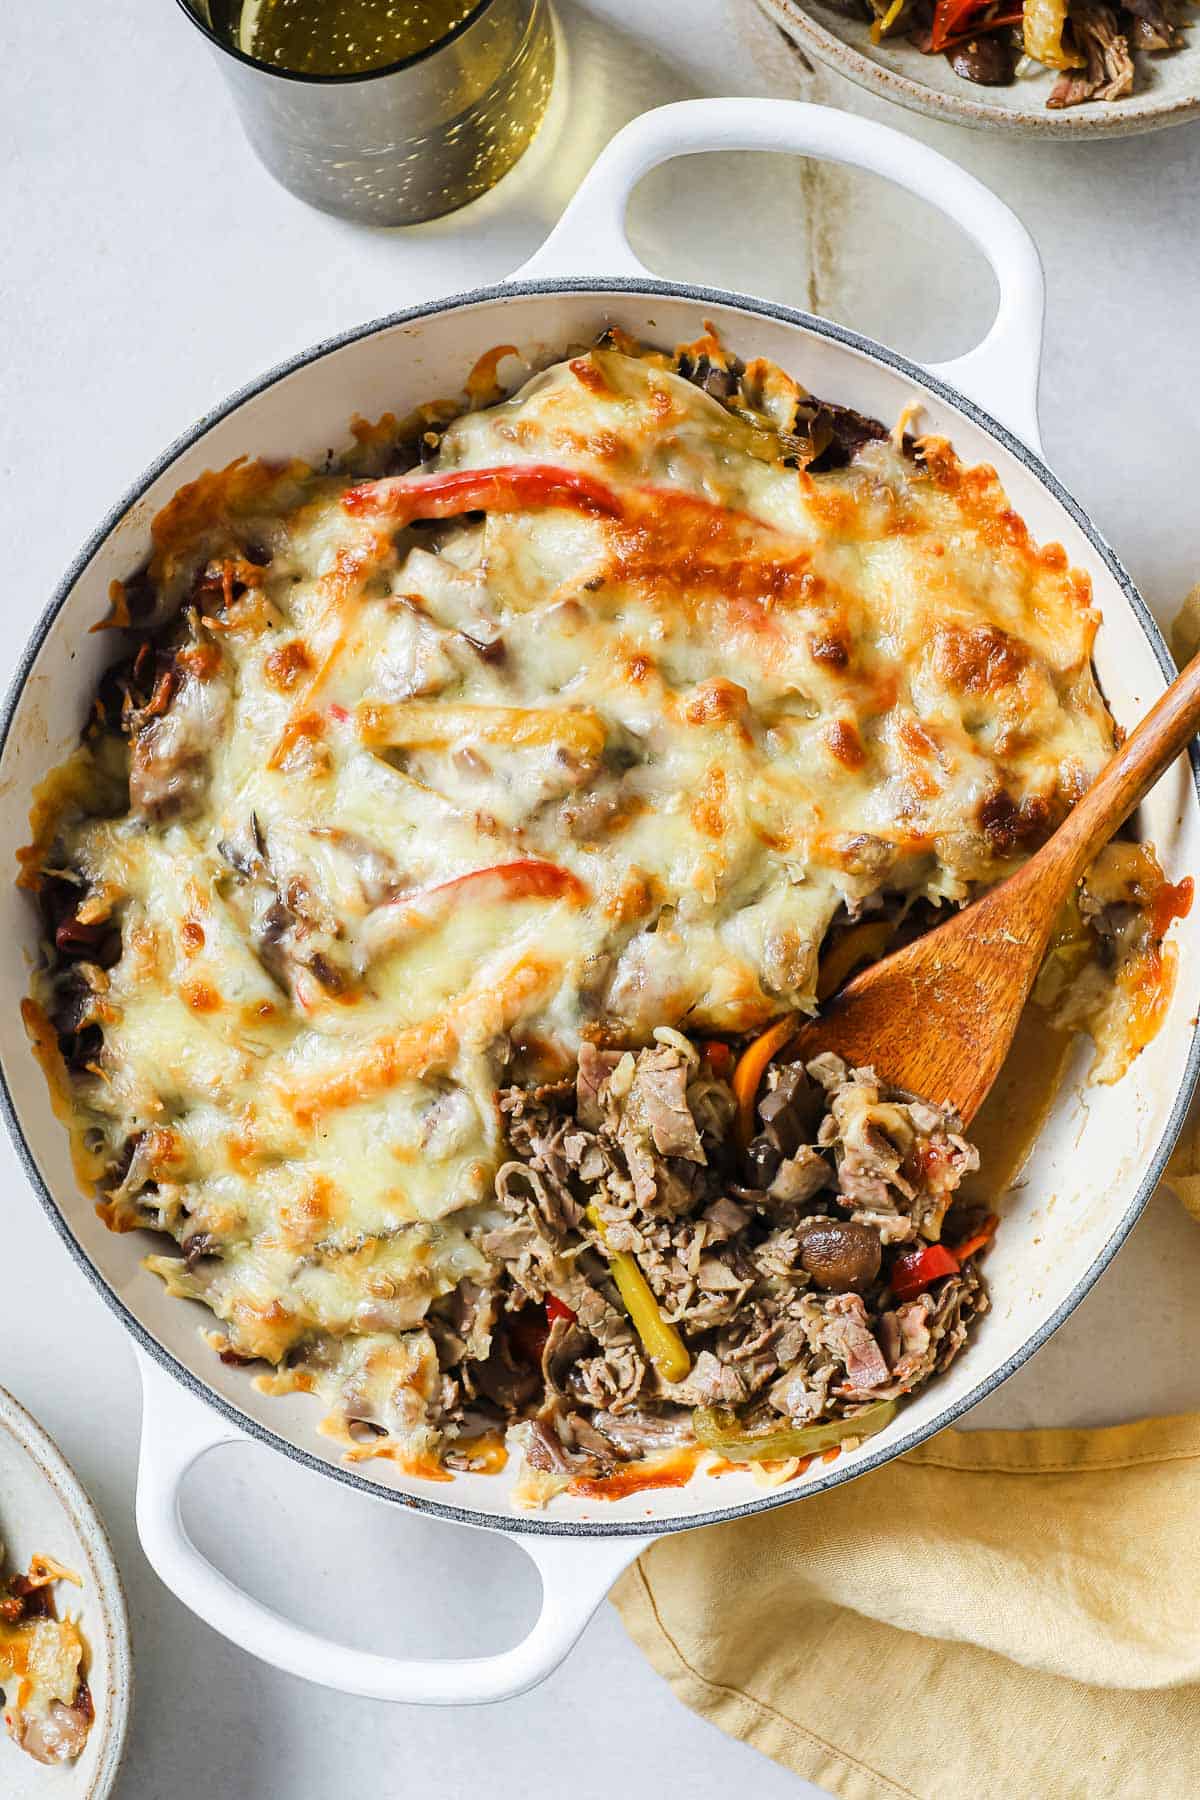 a cast iron skillet full of a casserole with meat, cheese, and vegetables.